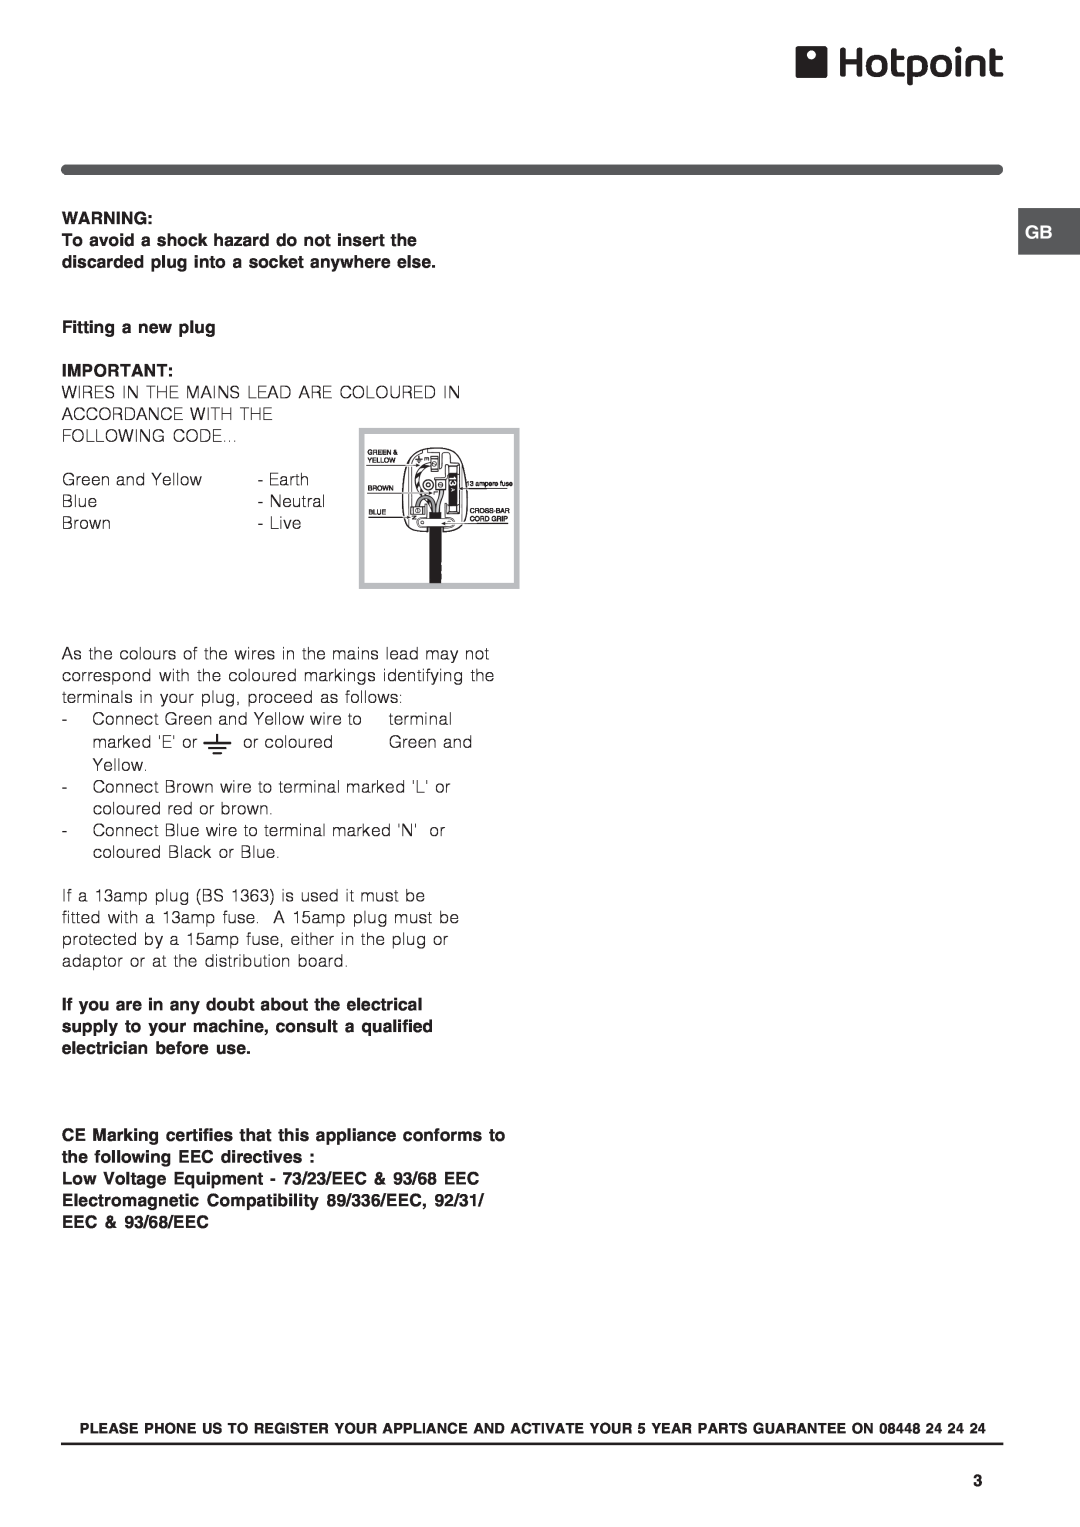 Hotpoint hm315x f operating instructions Fitting a new plug 